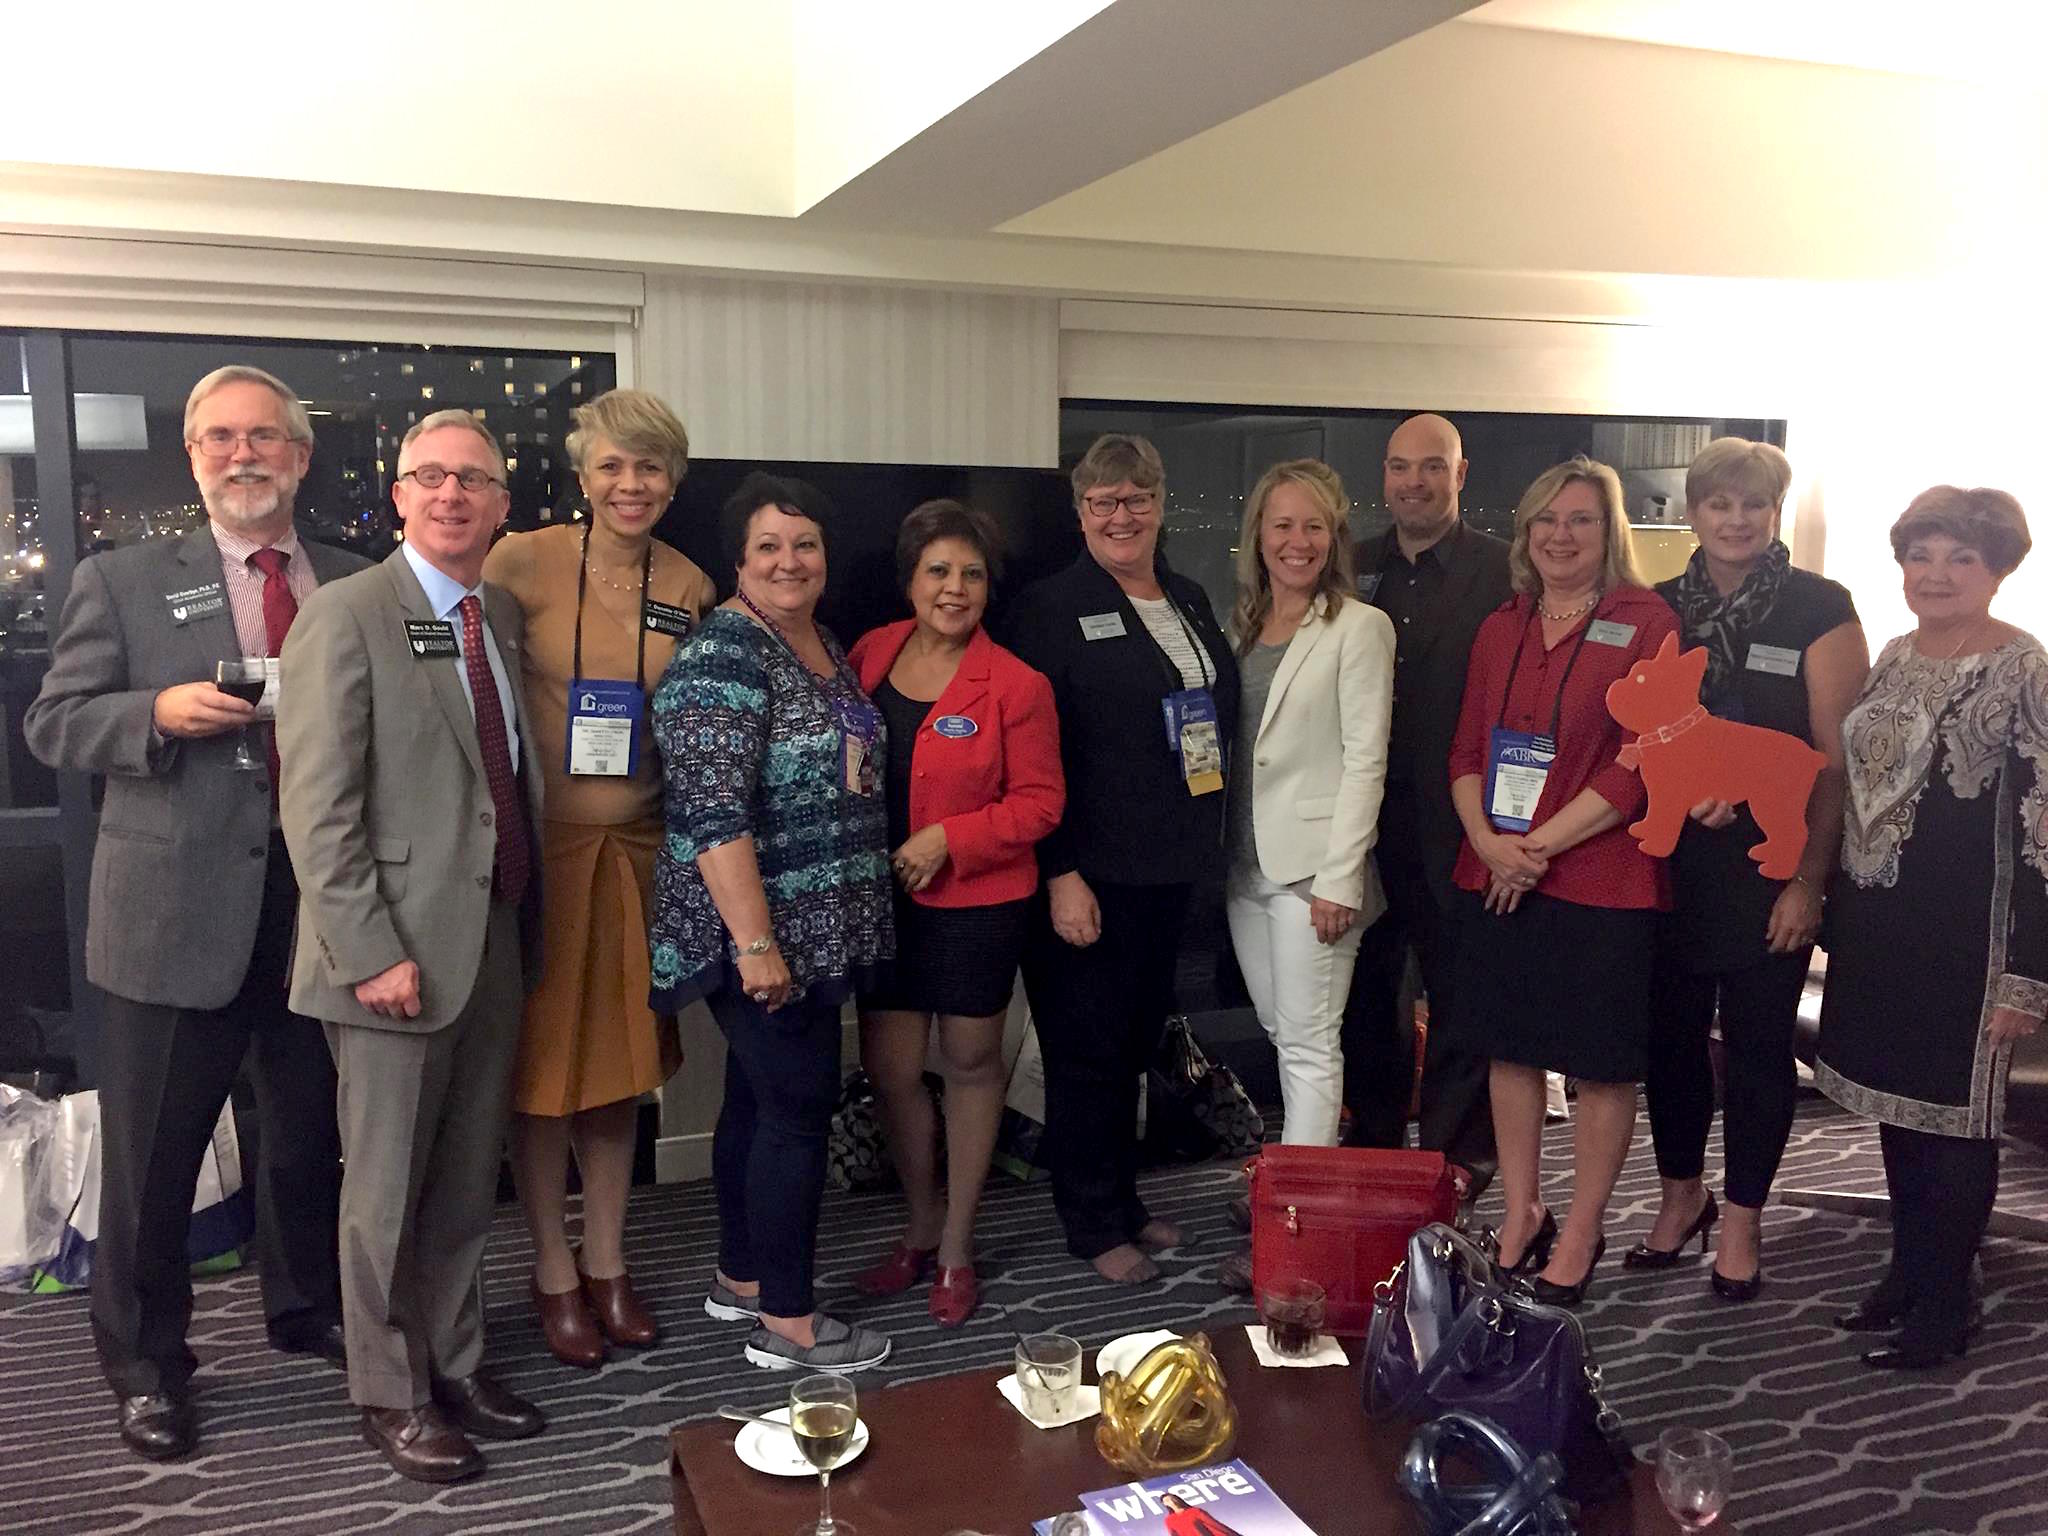 REALTOR® University gathering at the 2015 REALTORS® Conference & Expo in San Diego. 